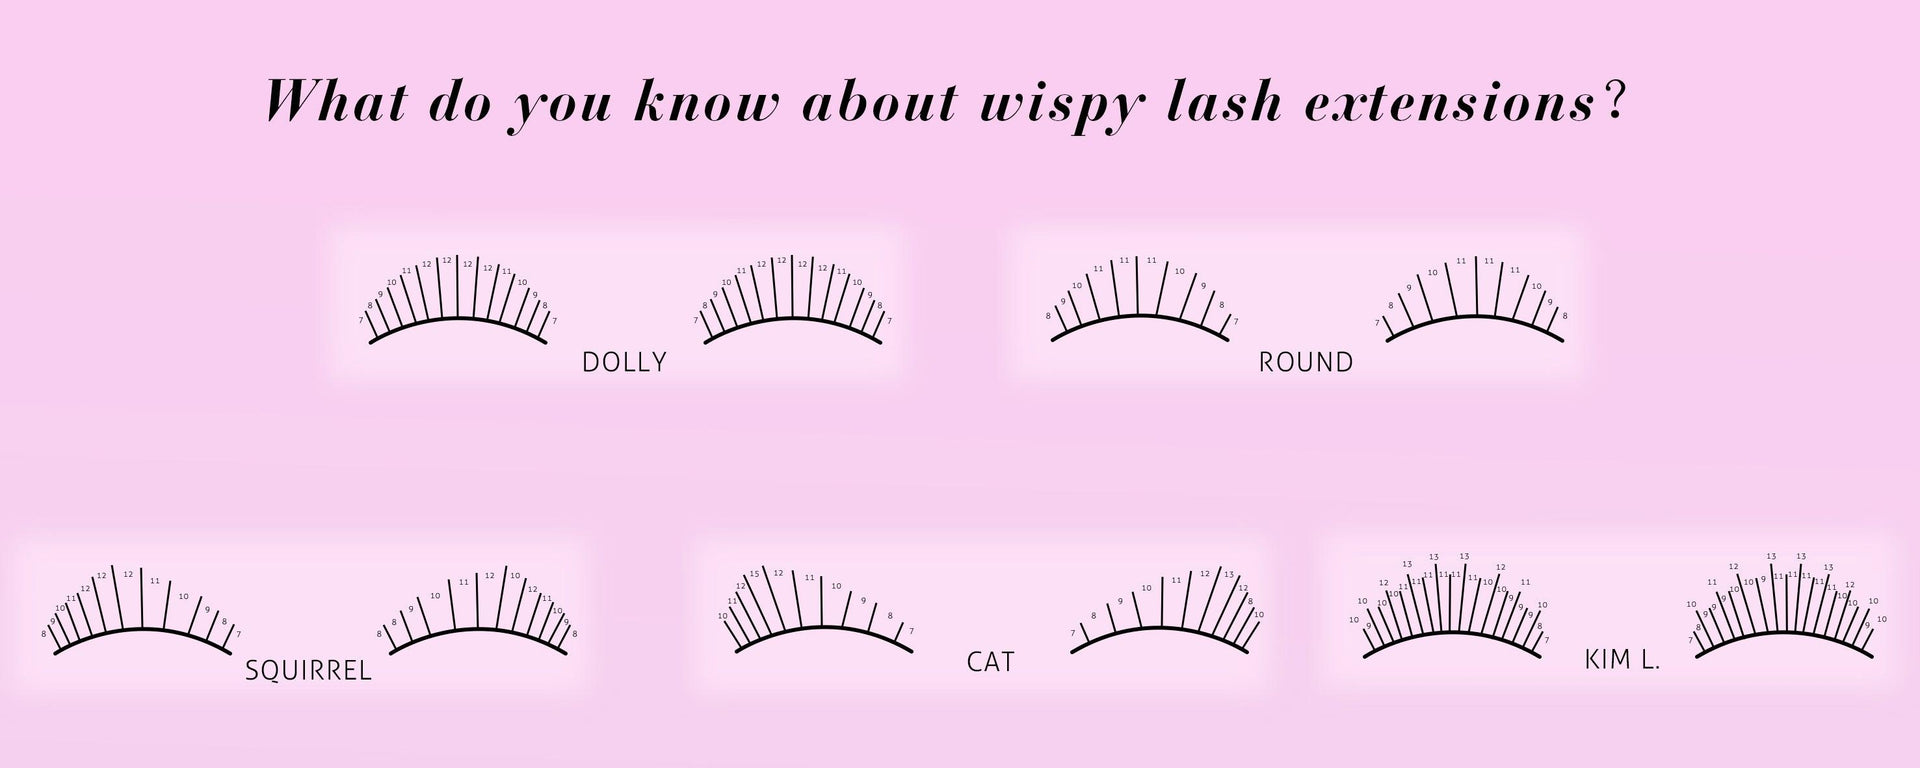 What do you know about wispy lash extensions? - VAVALASH